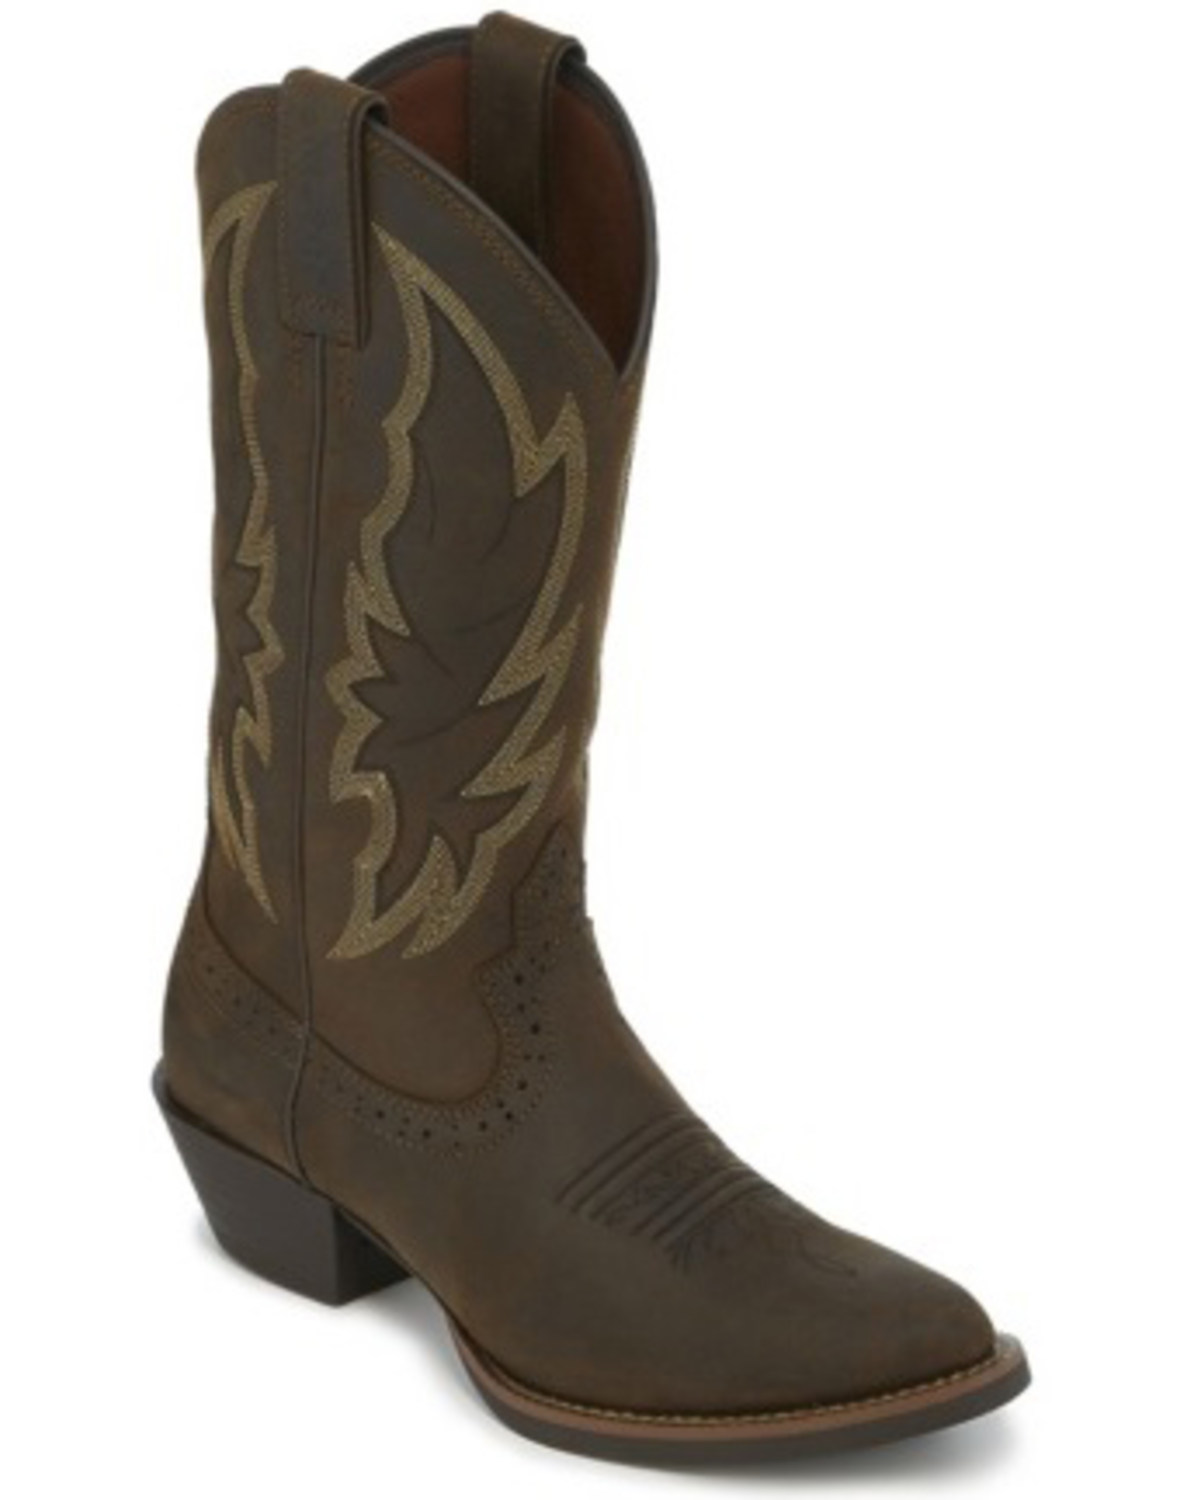 Justin Women's Rosella Western Boots - Round Toe